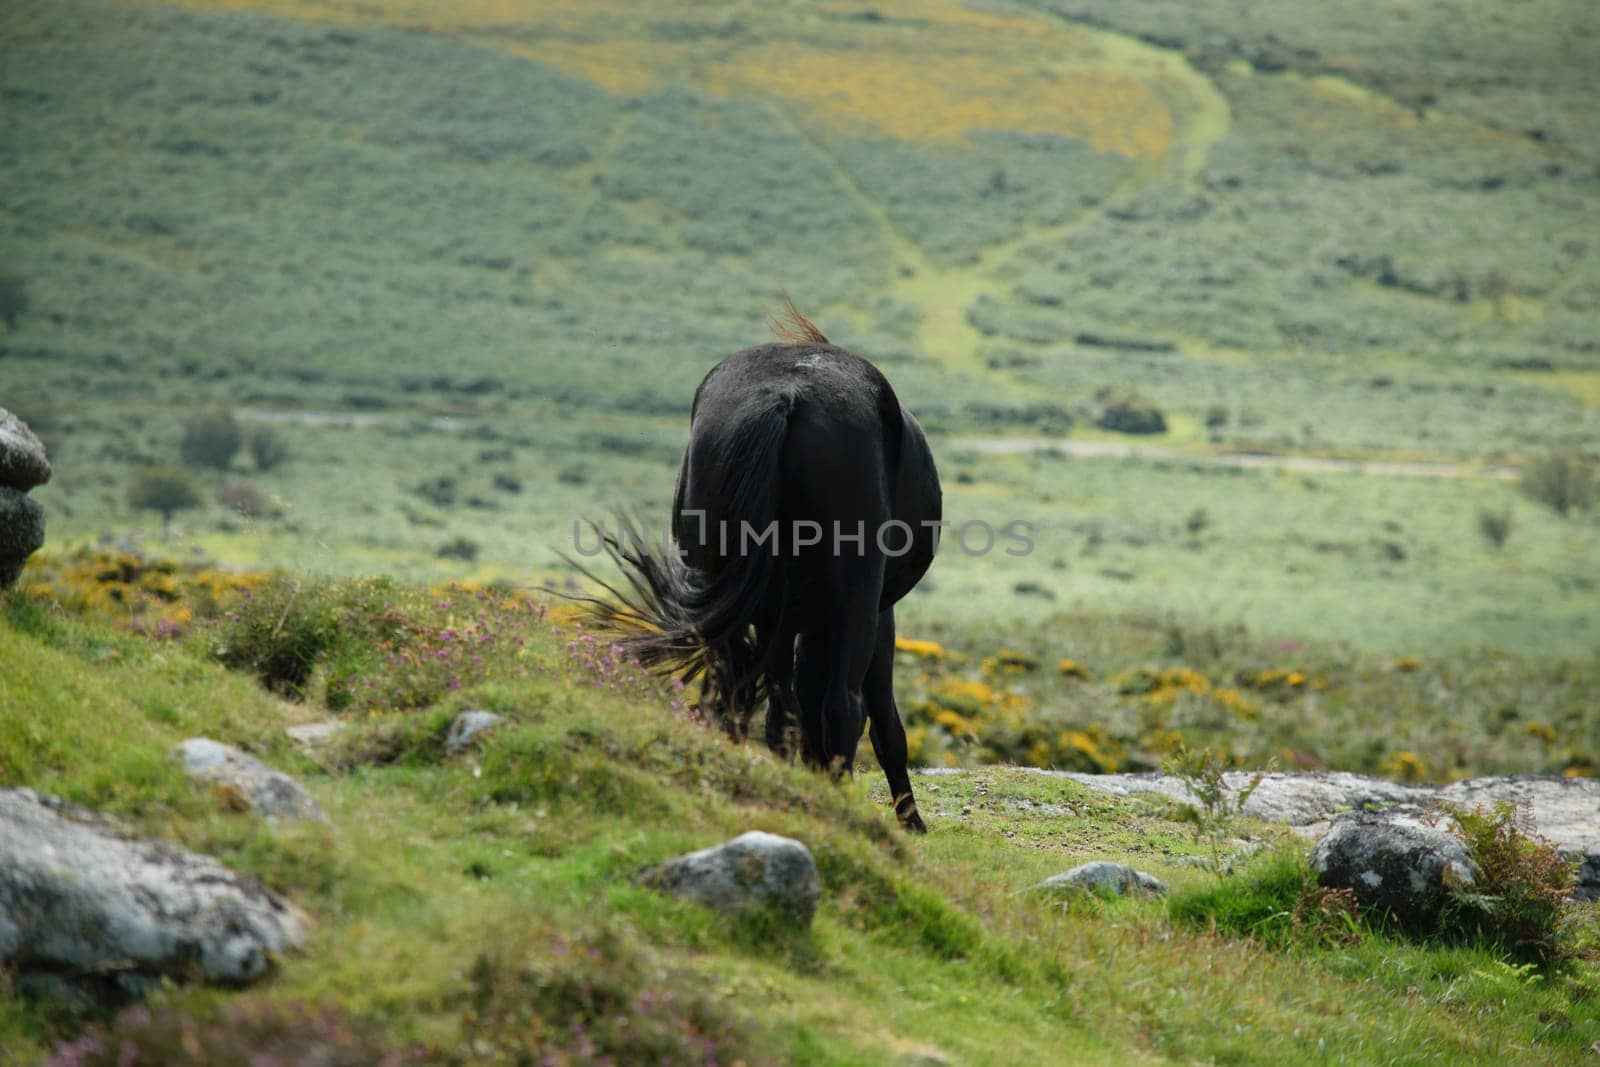 A black horse walking away on a grassy hill with a scenic landscape in the background.